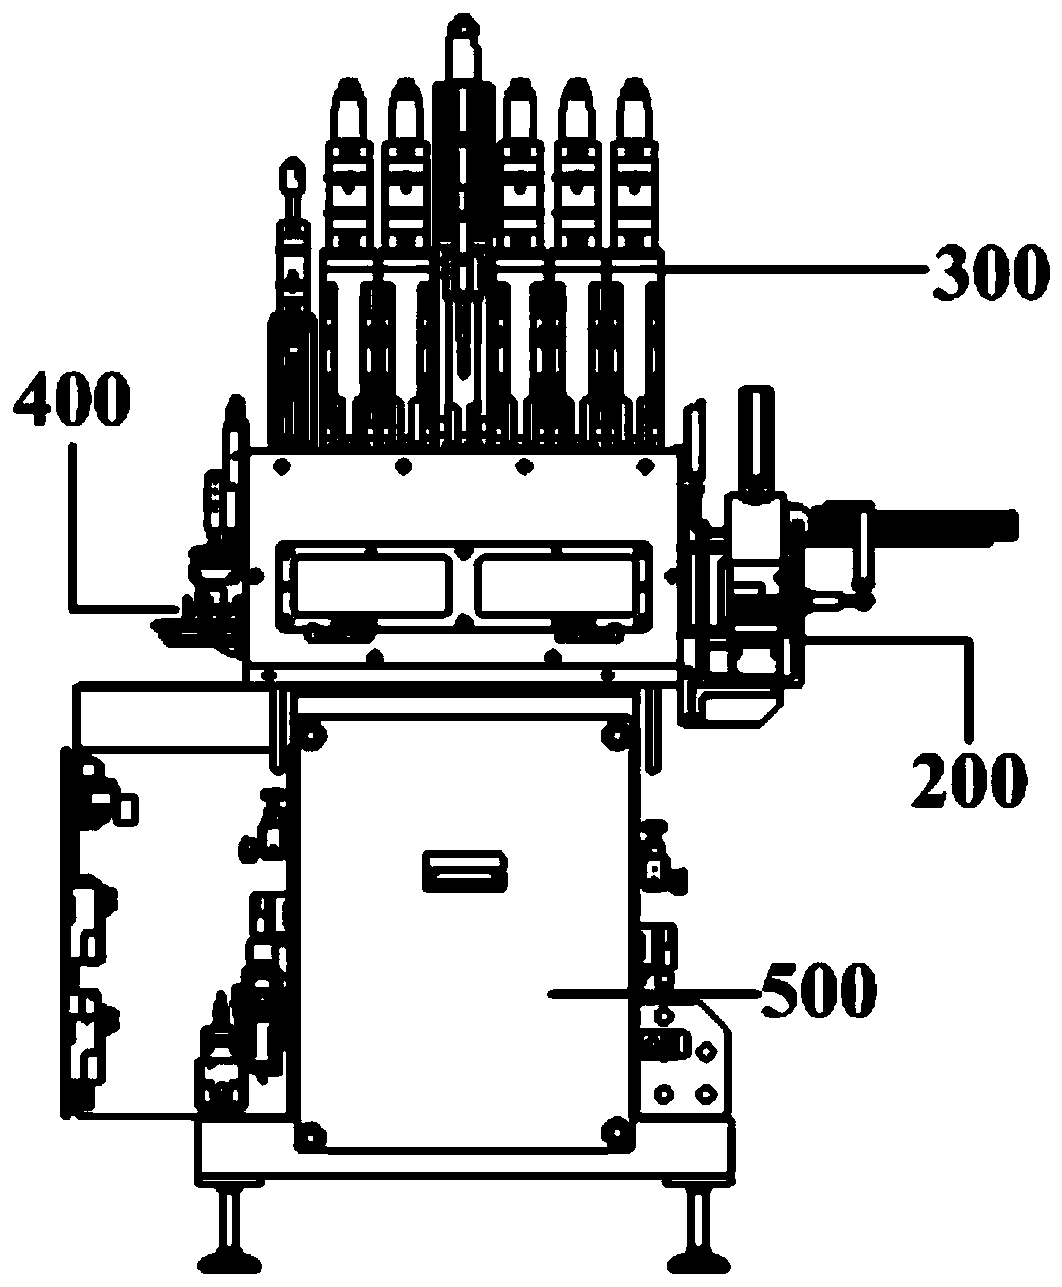 An electrical composite drive precision glass molding machine and its operating method